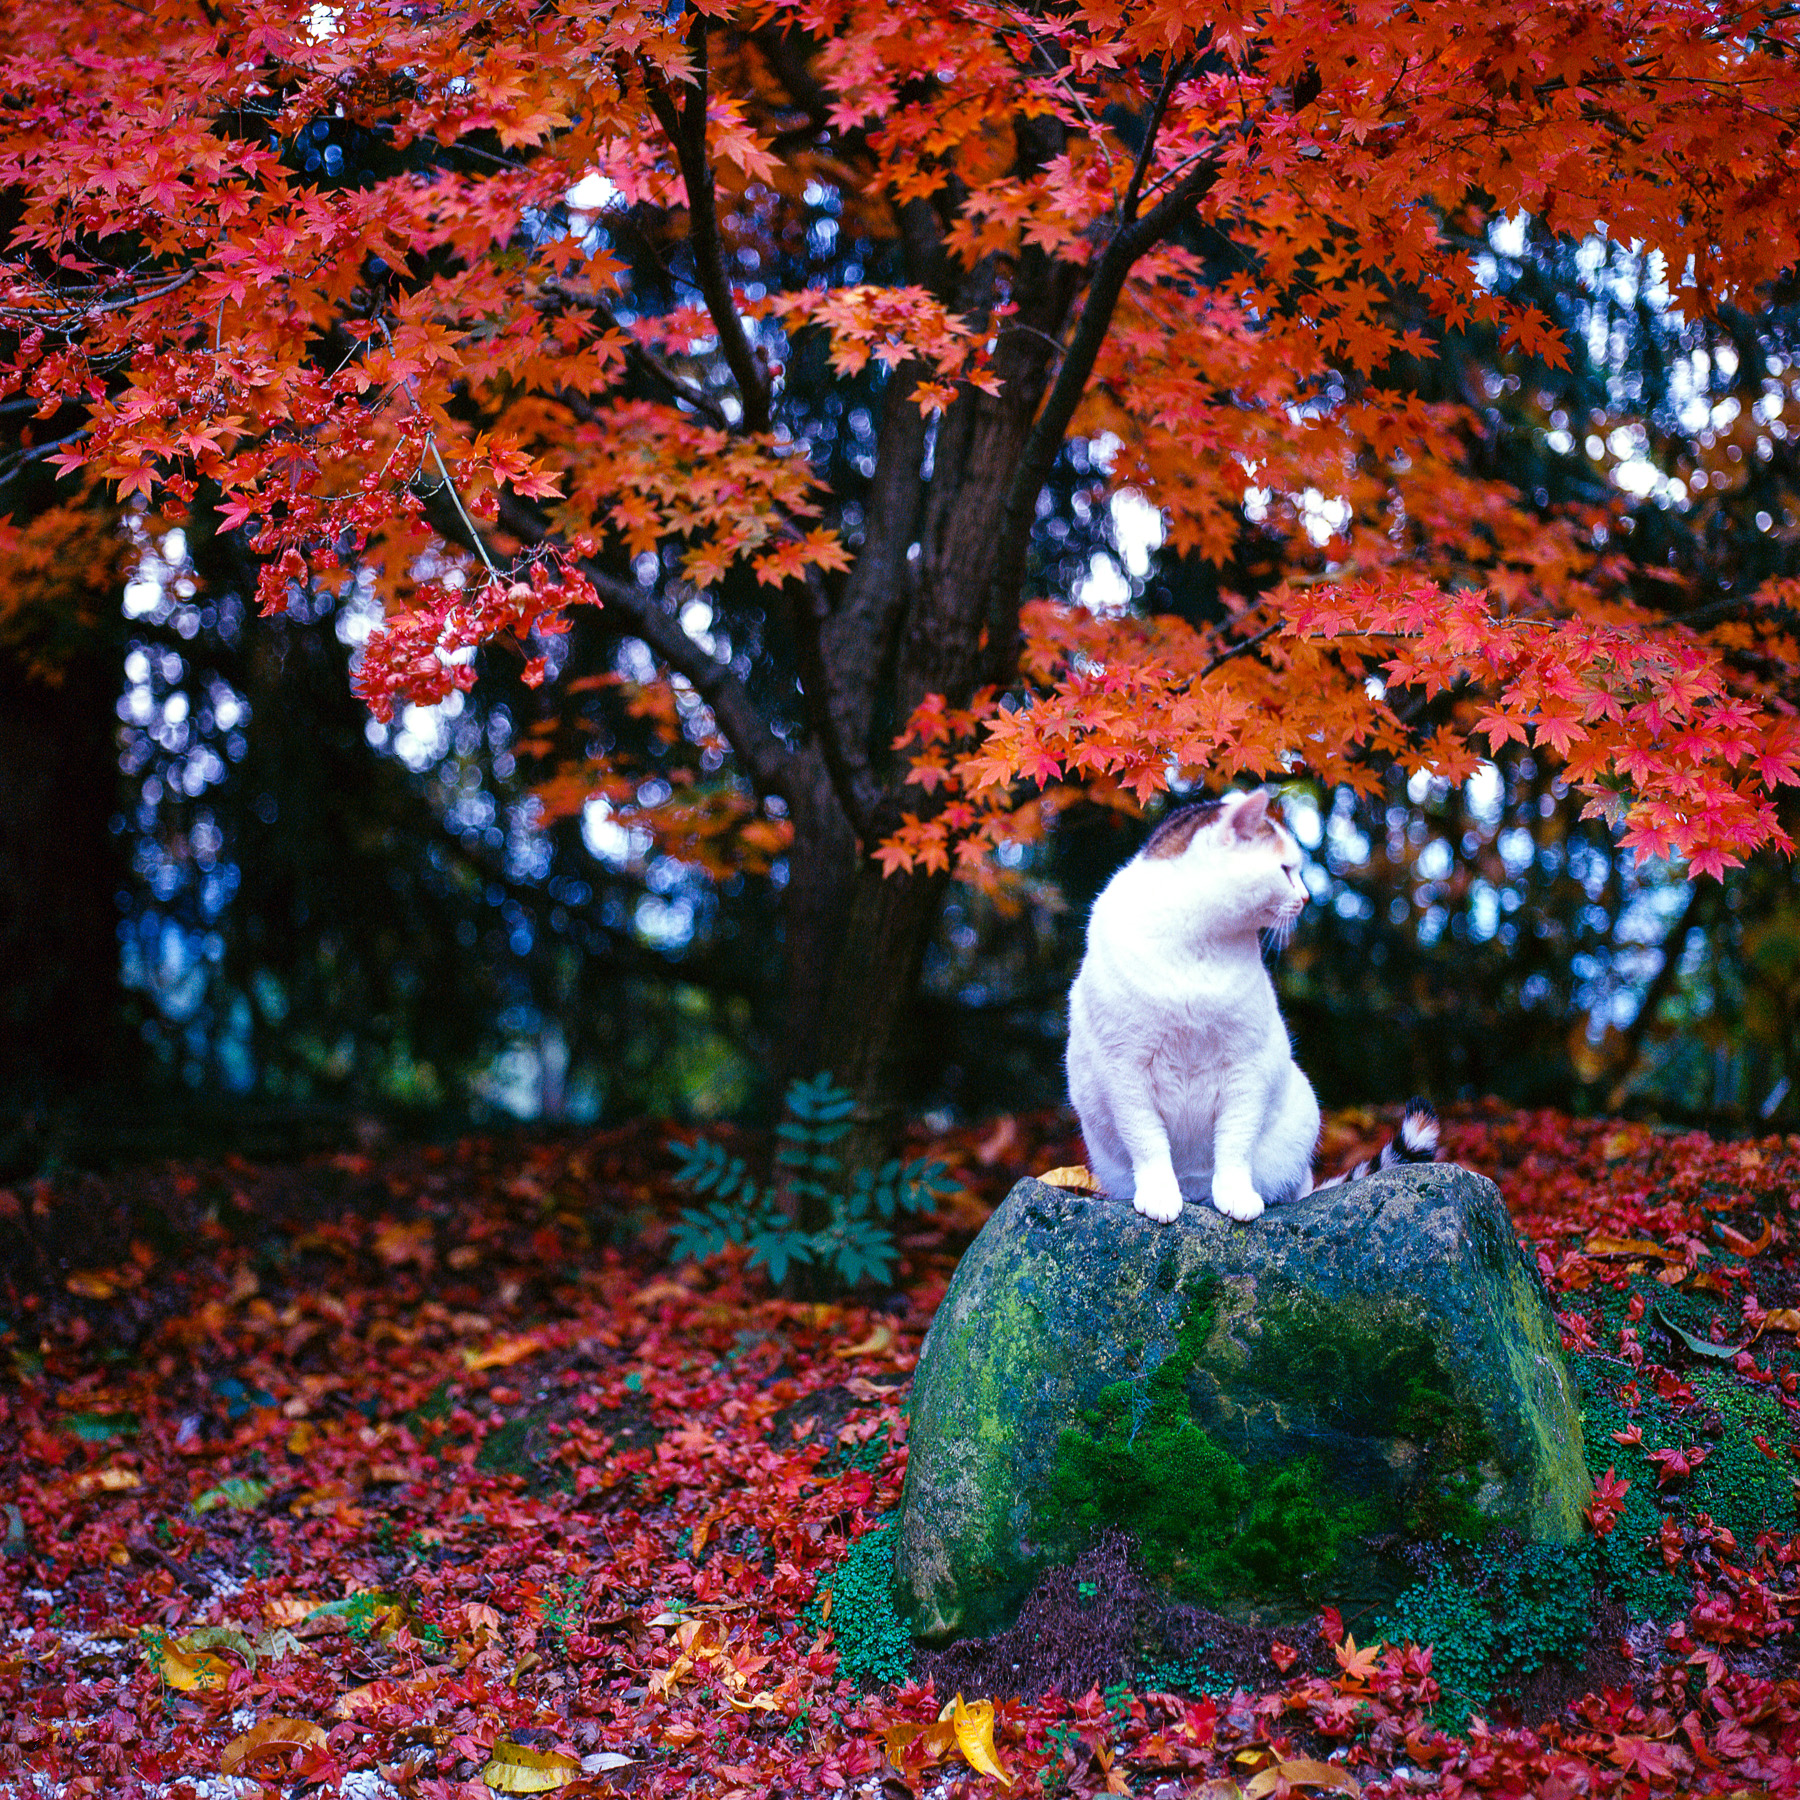 The tree, the cat and a stone